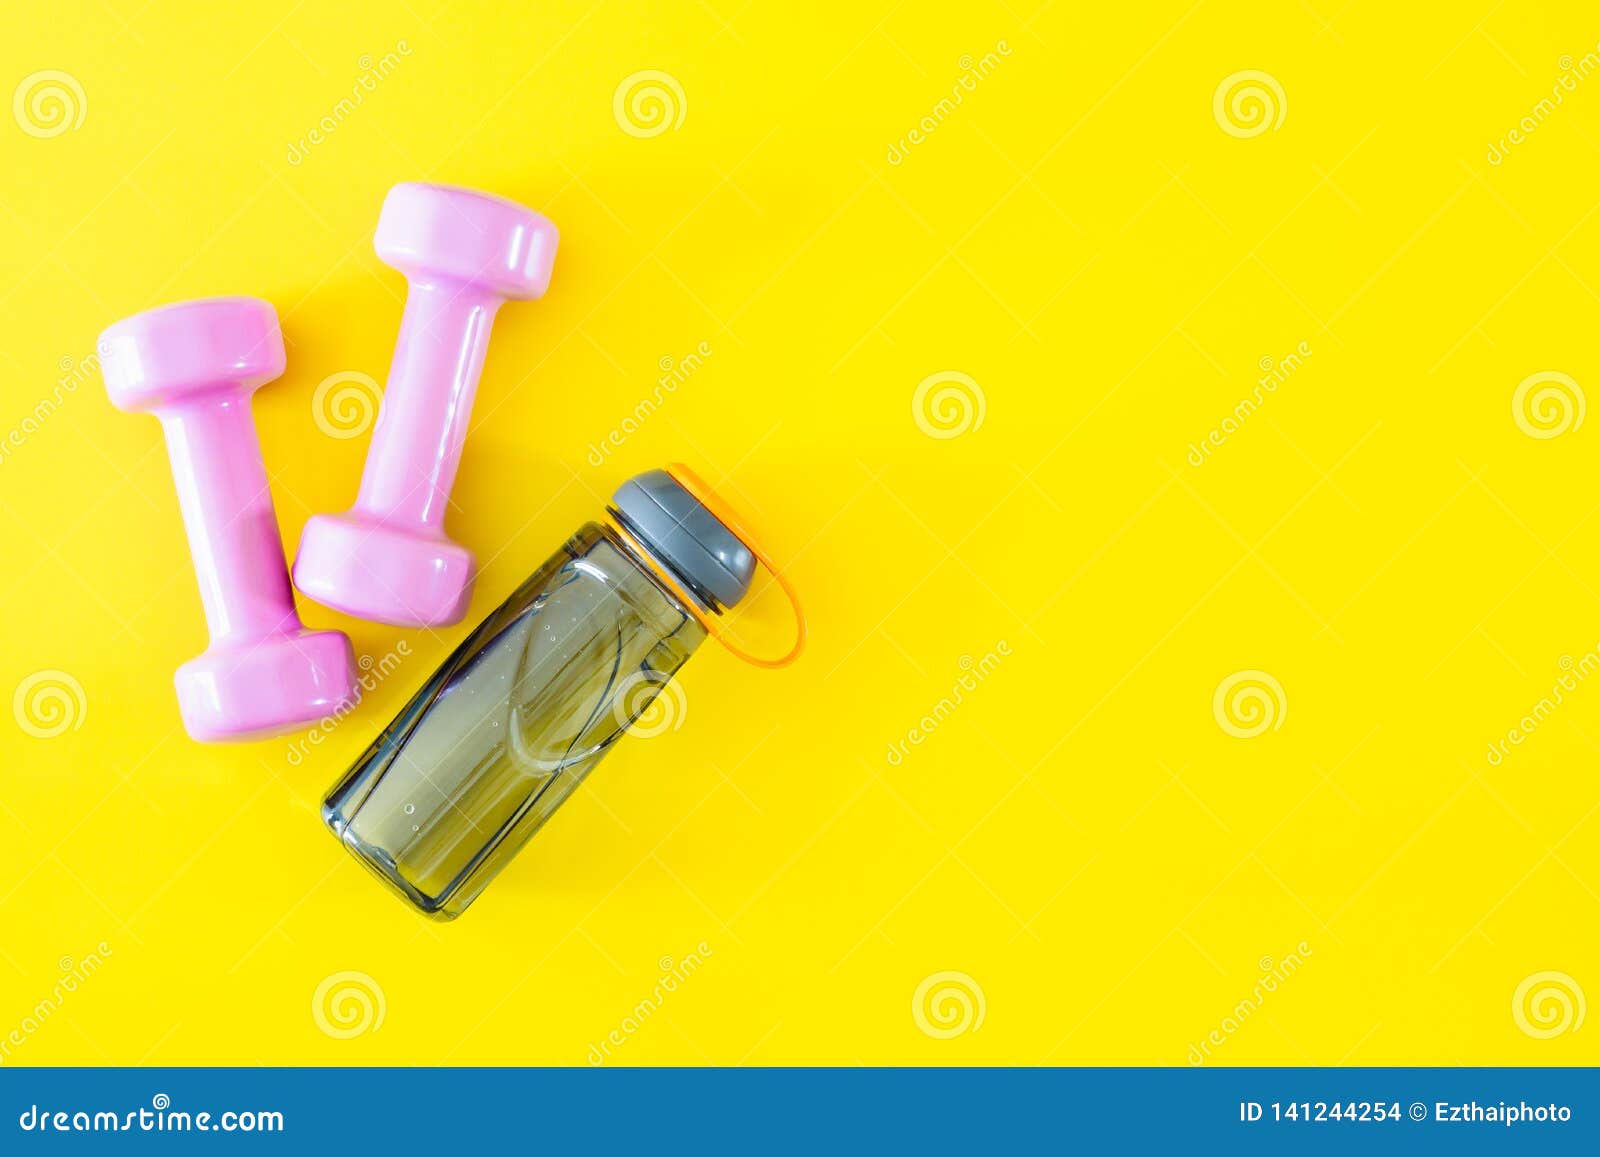 Download Top View Of Pink Dumbbells And Bottle Of Water On Yellow Background Fitness And Healthy Lifestyle Background Concept Stock Photo Image Of Copy Power 141244254 Yellowimages Mockups